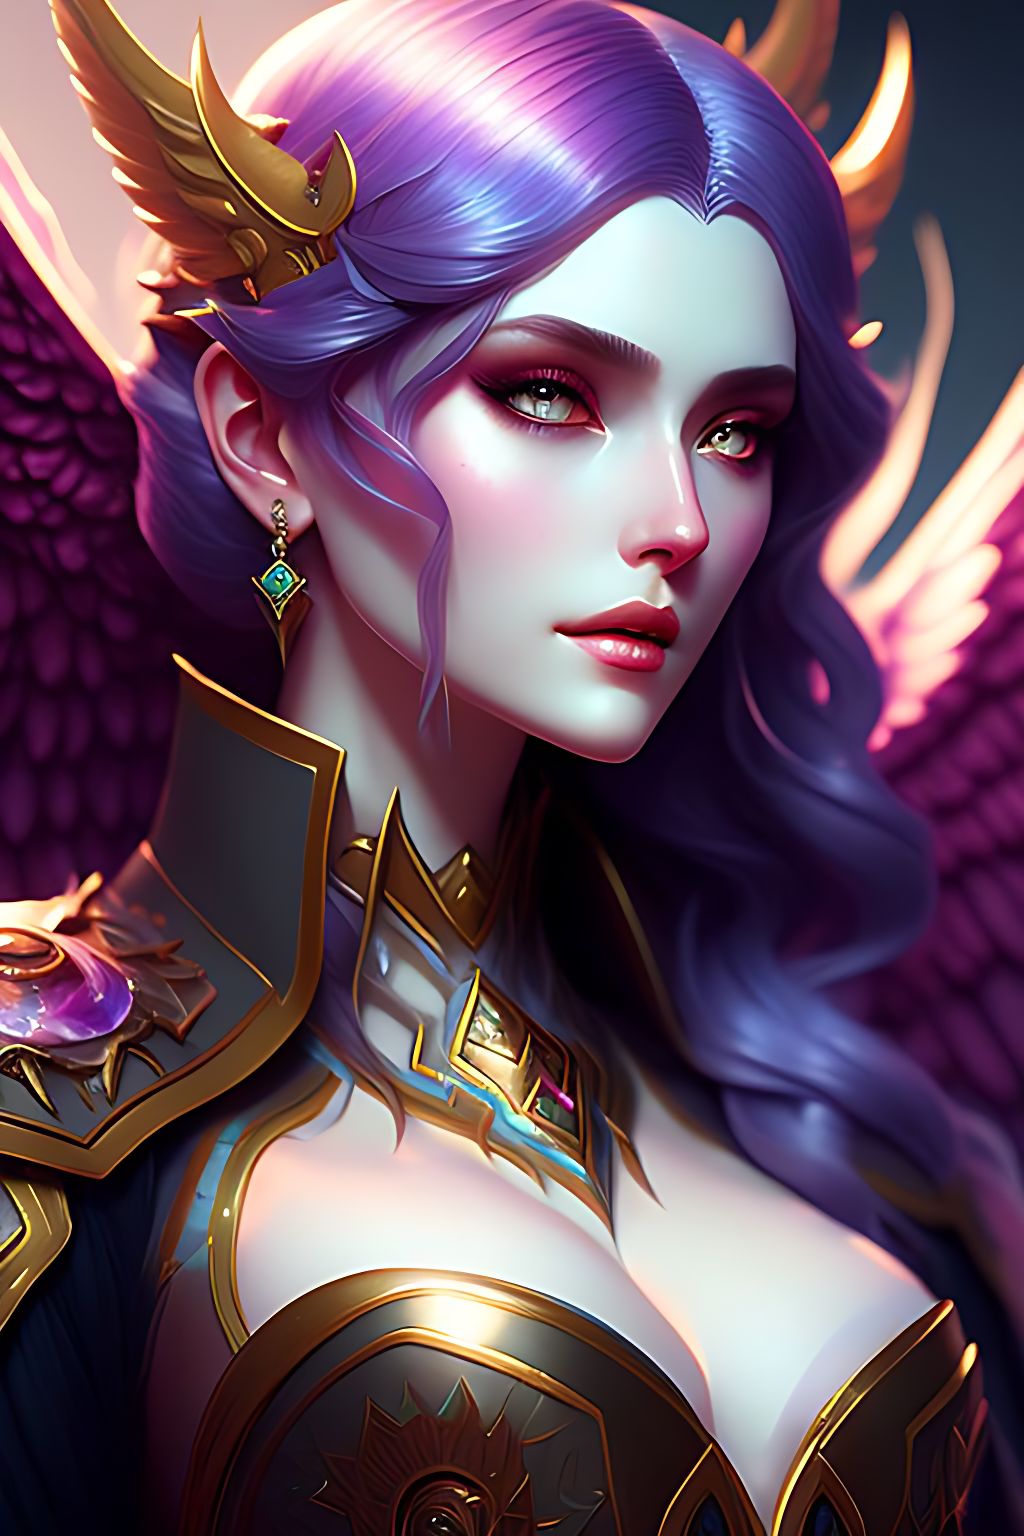 Sana Close Up Portrait Of Morgana The Fallen Angel From League Of Legends